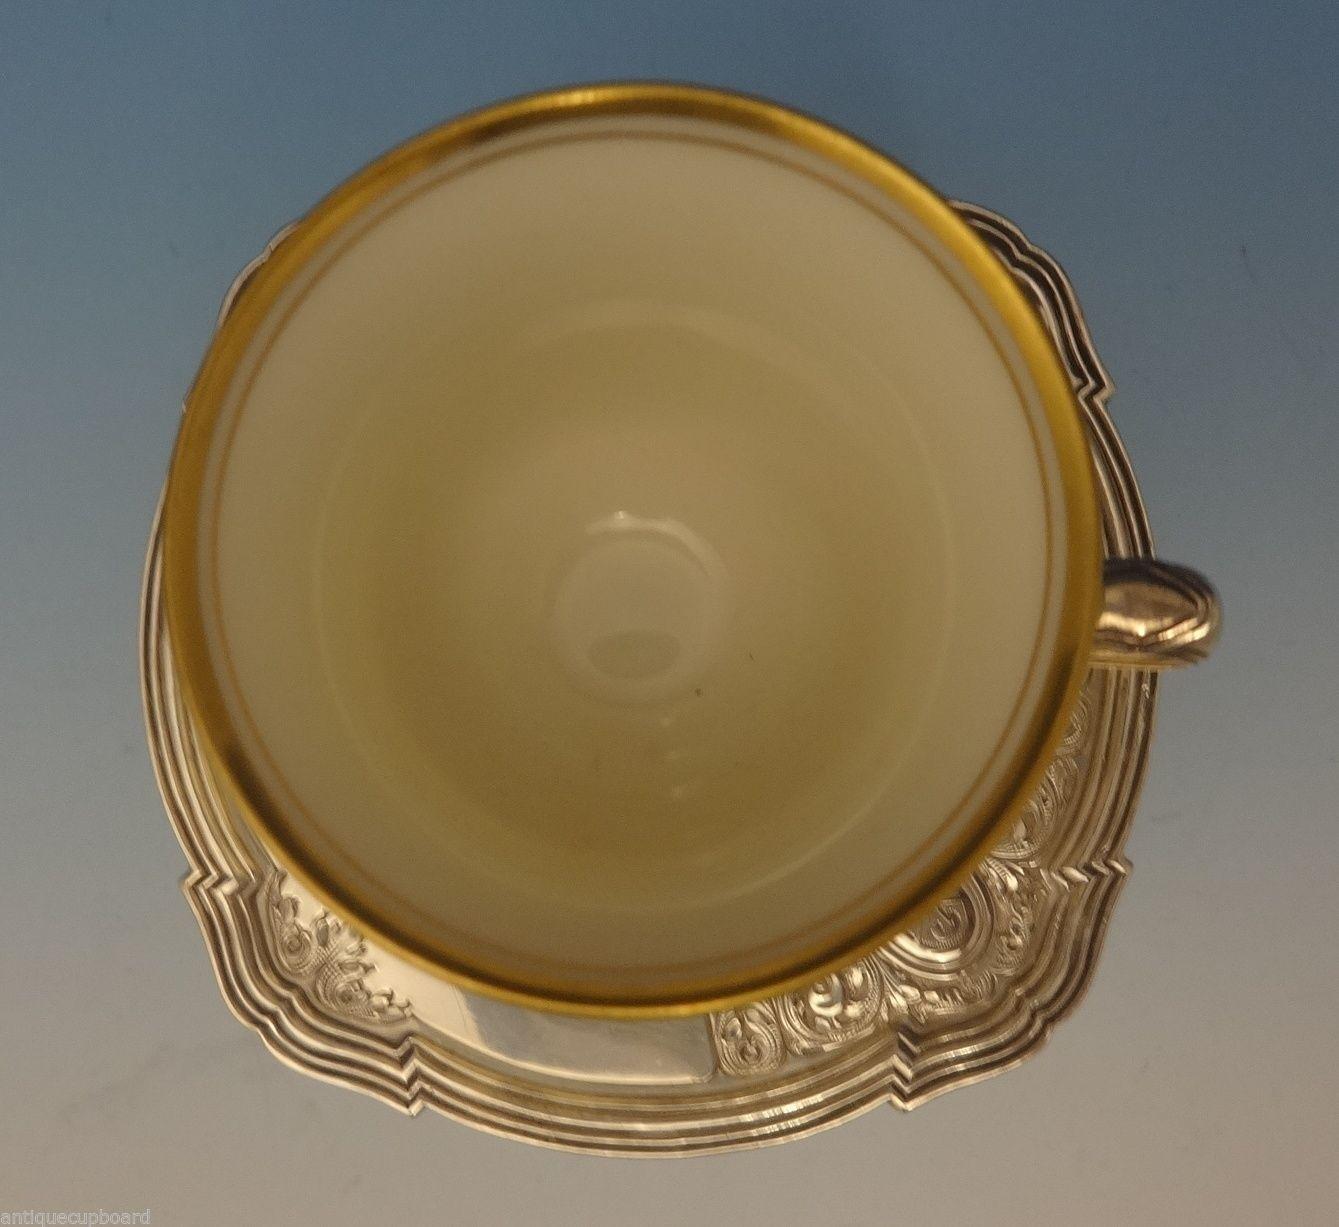 Saint Dunstan chased by Gorham sterling silver demitasse cup with saucer and liner with an R monogram. The saucer has a WKK special order mark, and the cup is a WKJ order mark. The pieces date from the 1920s. The cup with the liner measures 2 3/4